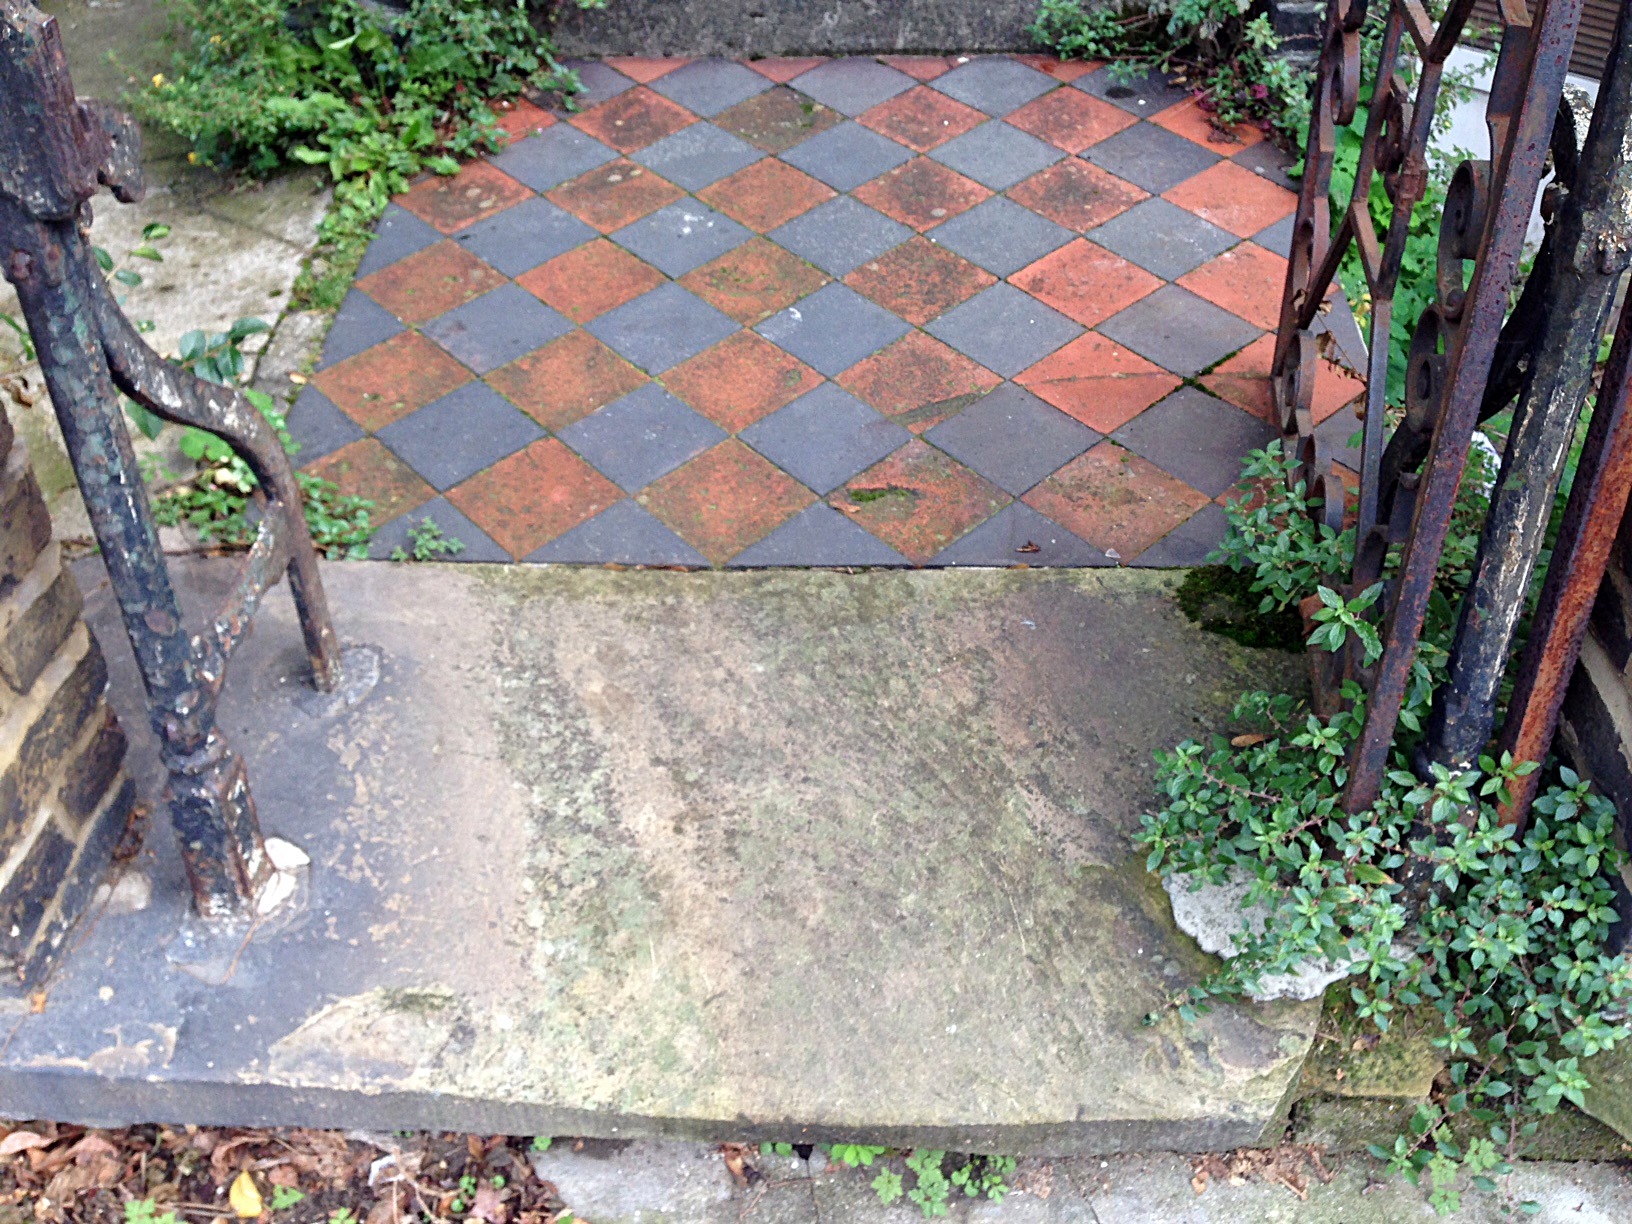 victorian original wrought iron roll back gate with old York stone quarry tile path and original London Stock brick wall Putney West Hill London# (2)